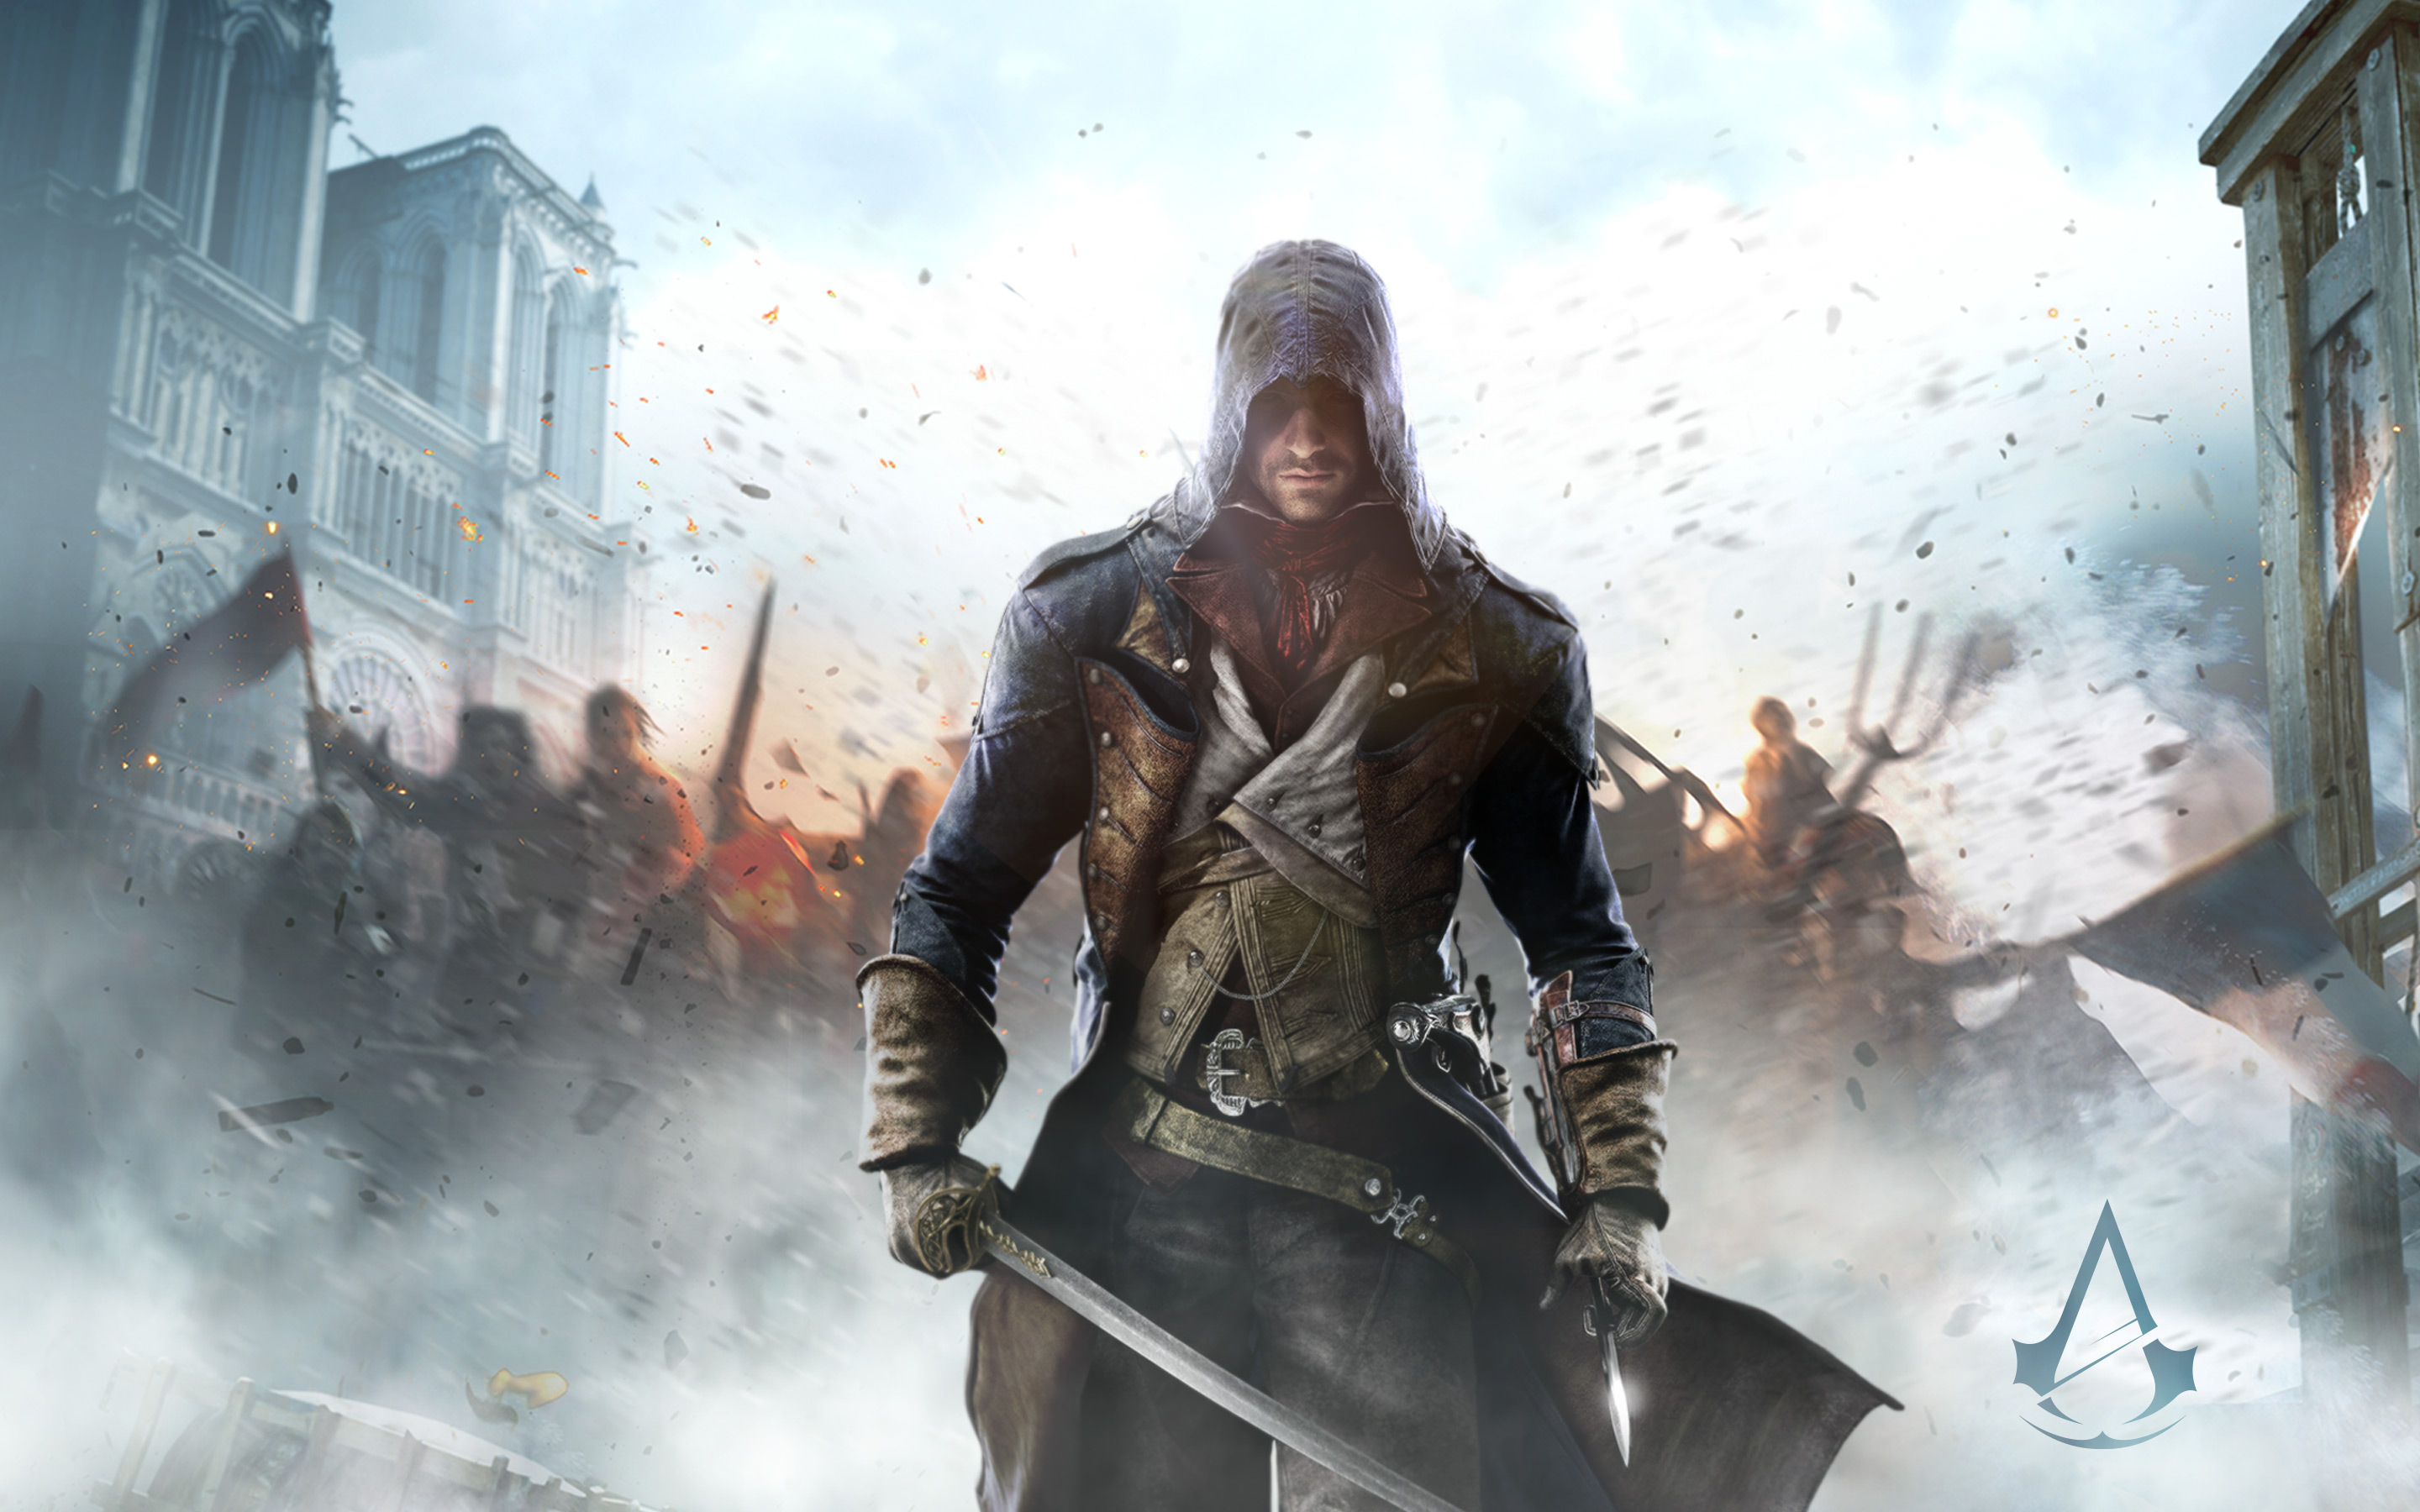 The Art of Assassin's Creed Unity